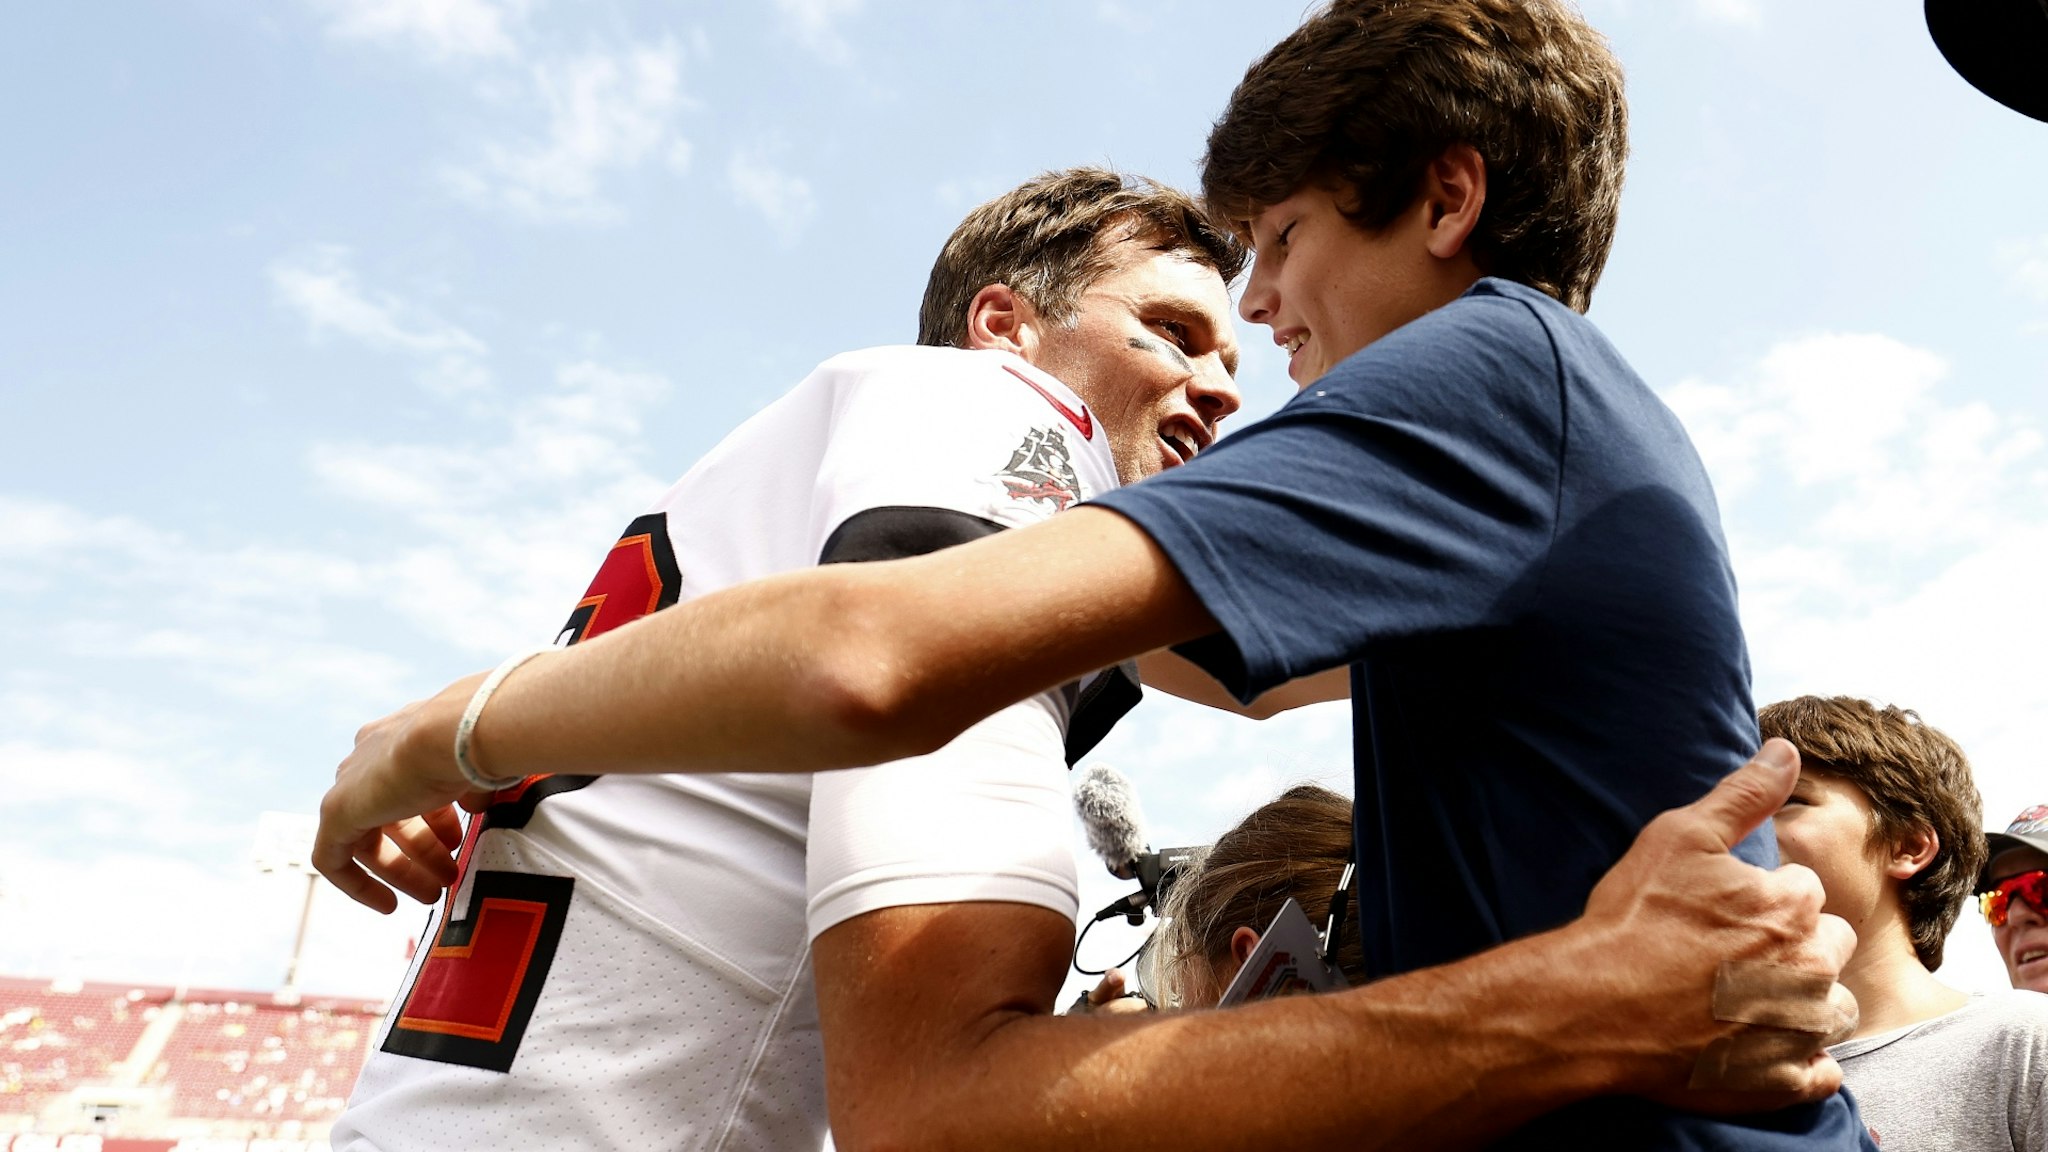 Tom Brady #12 of the Tampa Bay Buccaneers hugs his son John Edward Thomas Moynahan on the sidelines prior to the game against the Green Bay Packers at Raymond James Stadium on September 25, 2022 in Tampa, Florida.